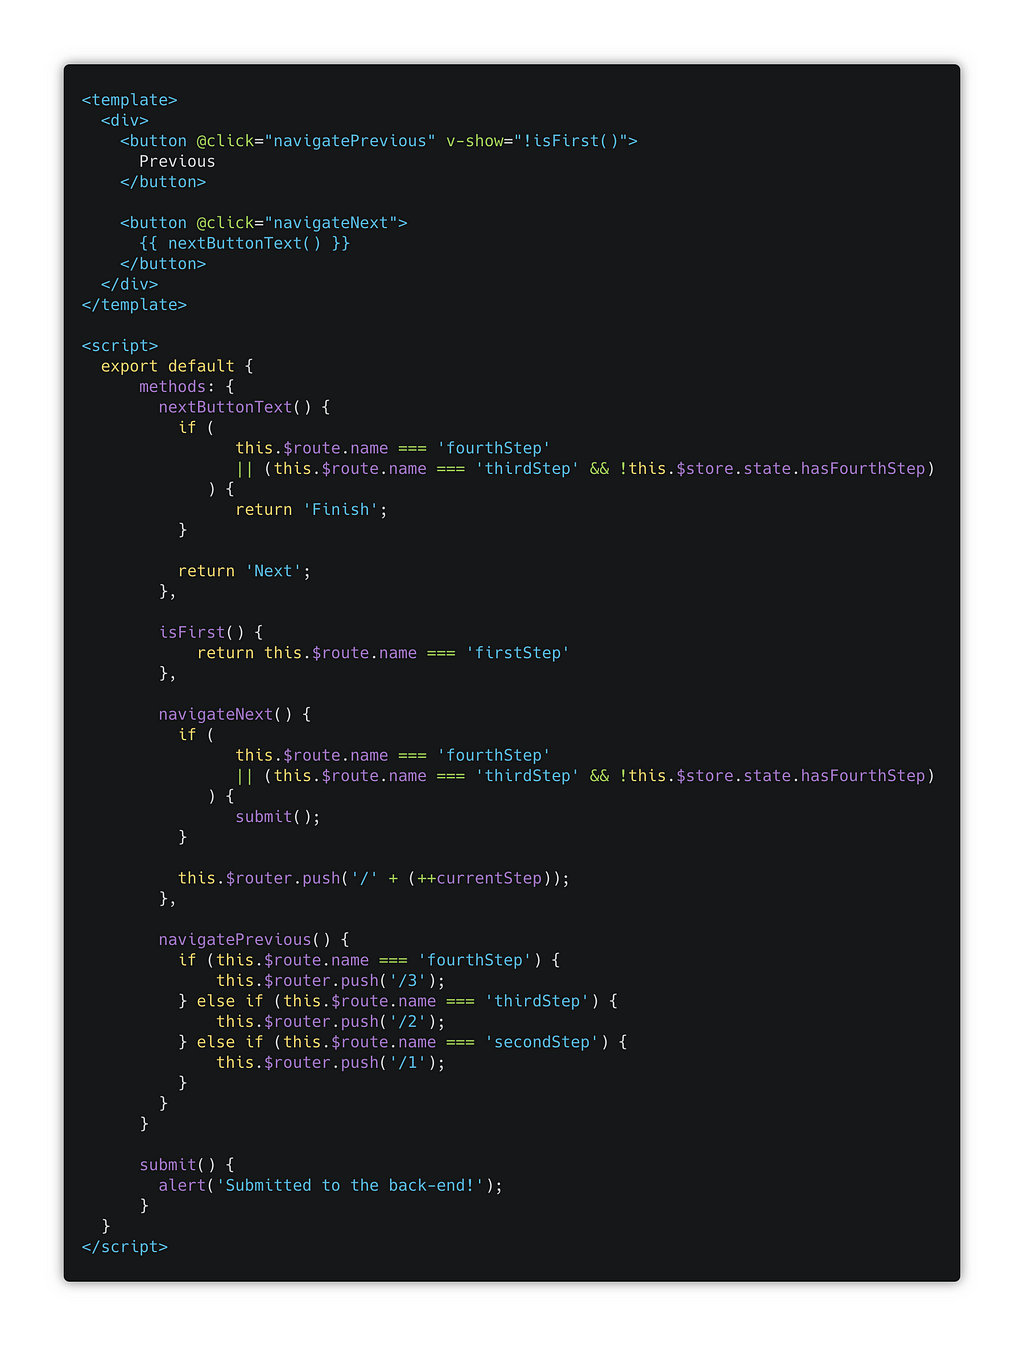 Code for the Navigation.vue component file.